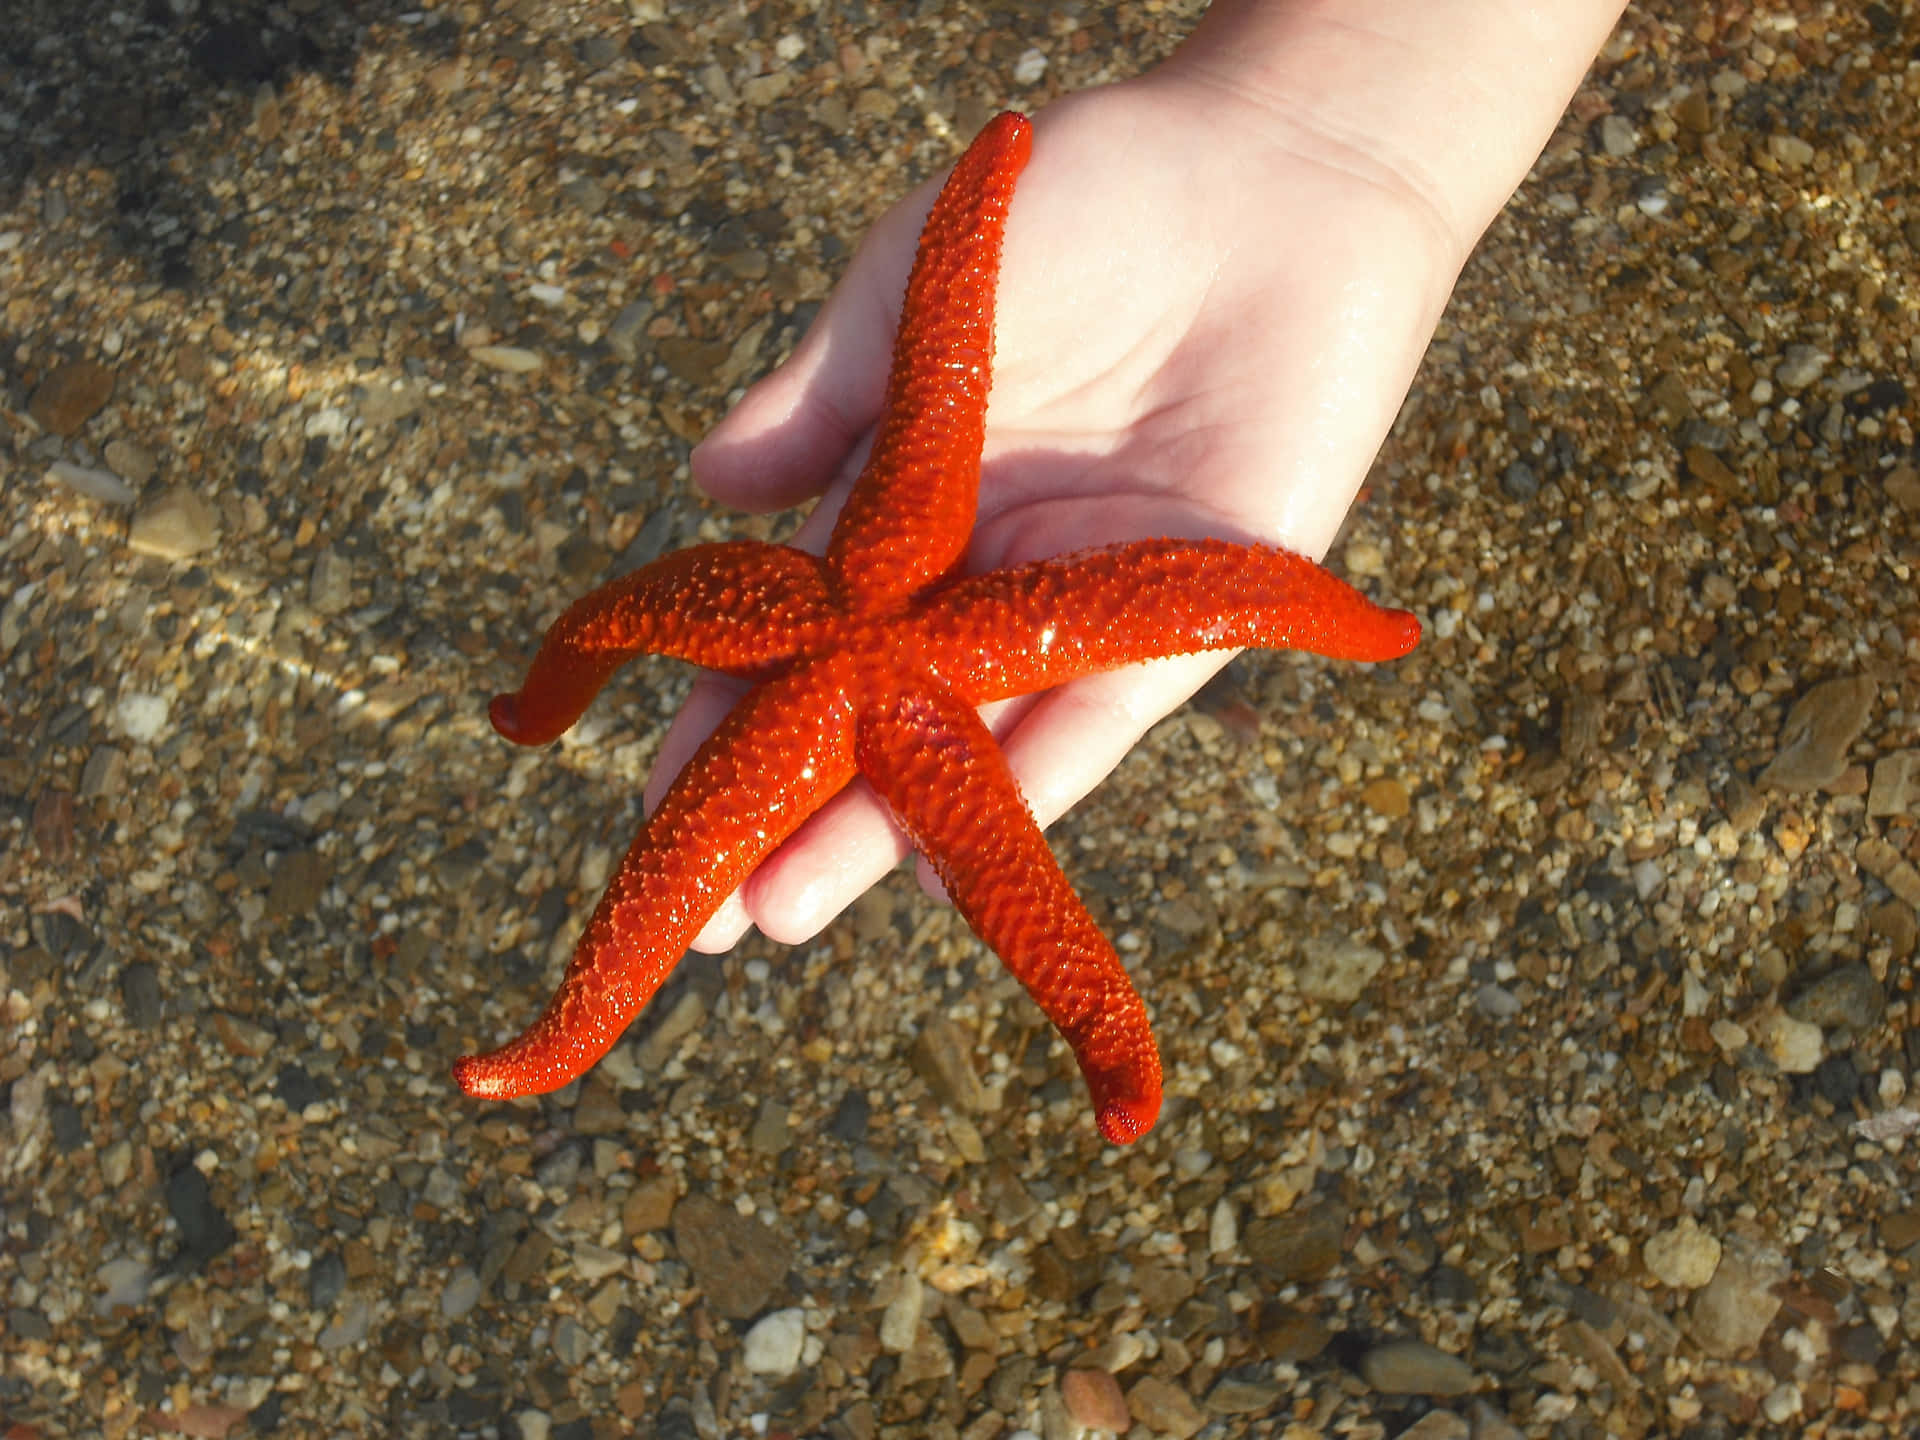 A brightly colored starfish resting on the sandy seafloor